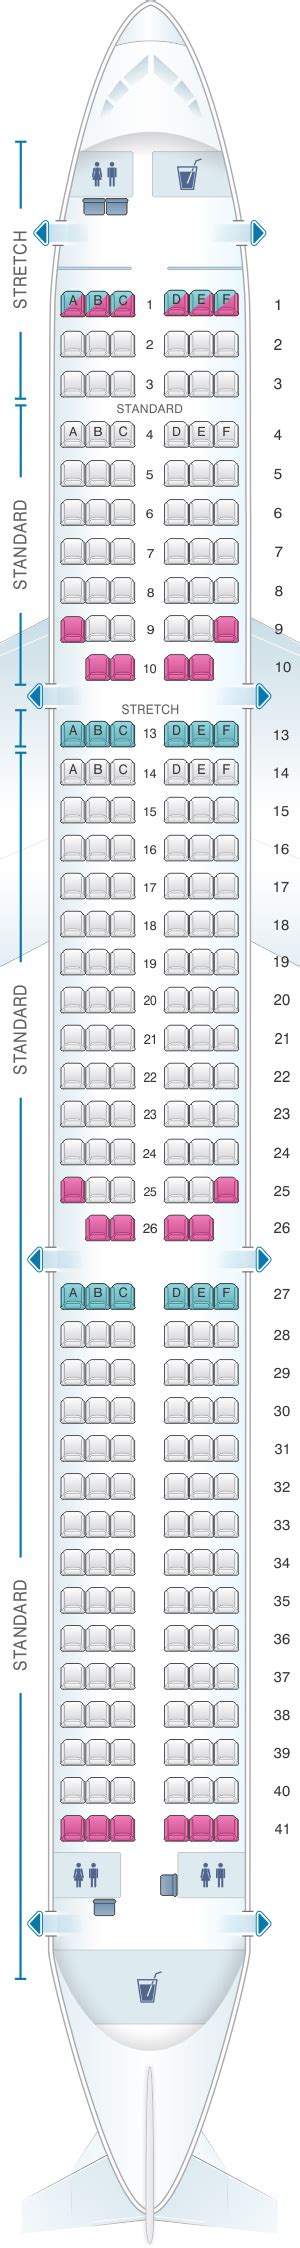 Frontier plane seat map. For your next Frontier flight, use this seating chart to get the most comfortable seats, ... Frontier Seat Maps. Overview; Planes & Seat Maps. Airbus A319 (319) Layout 1; 